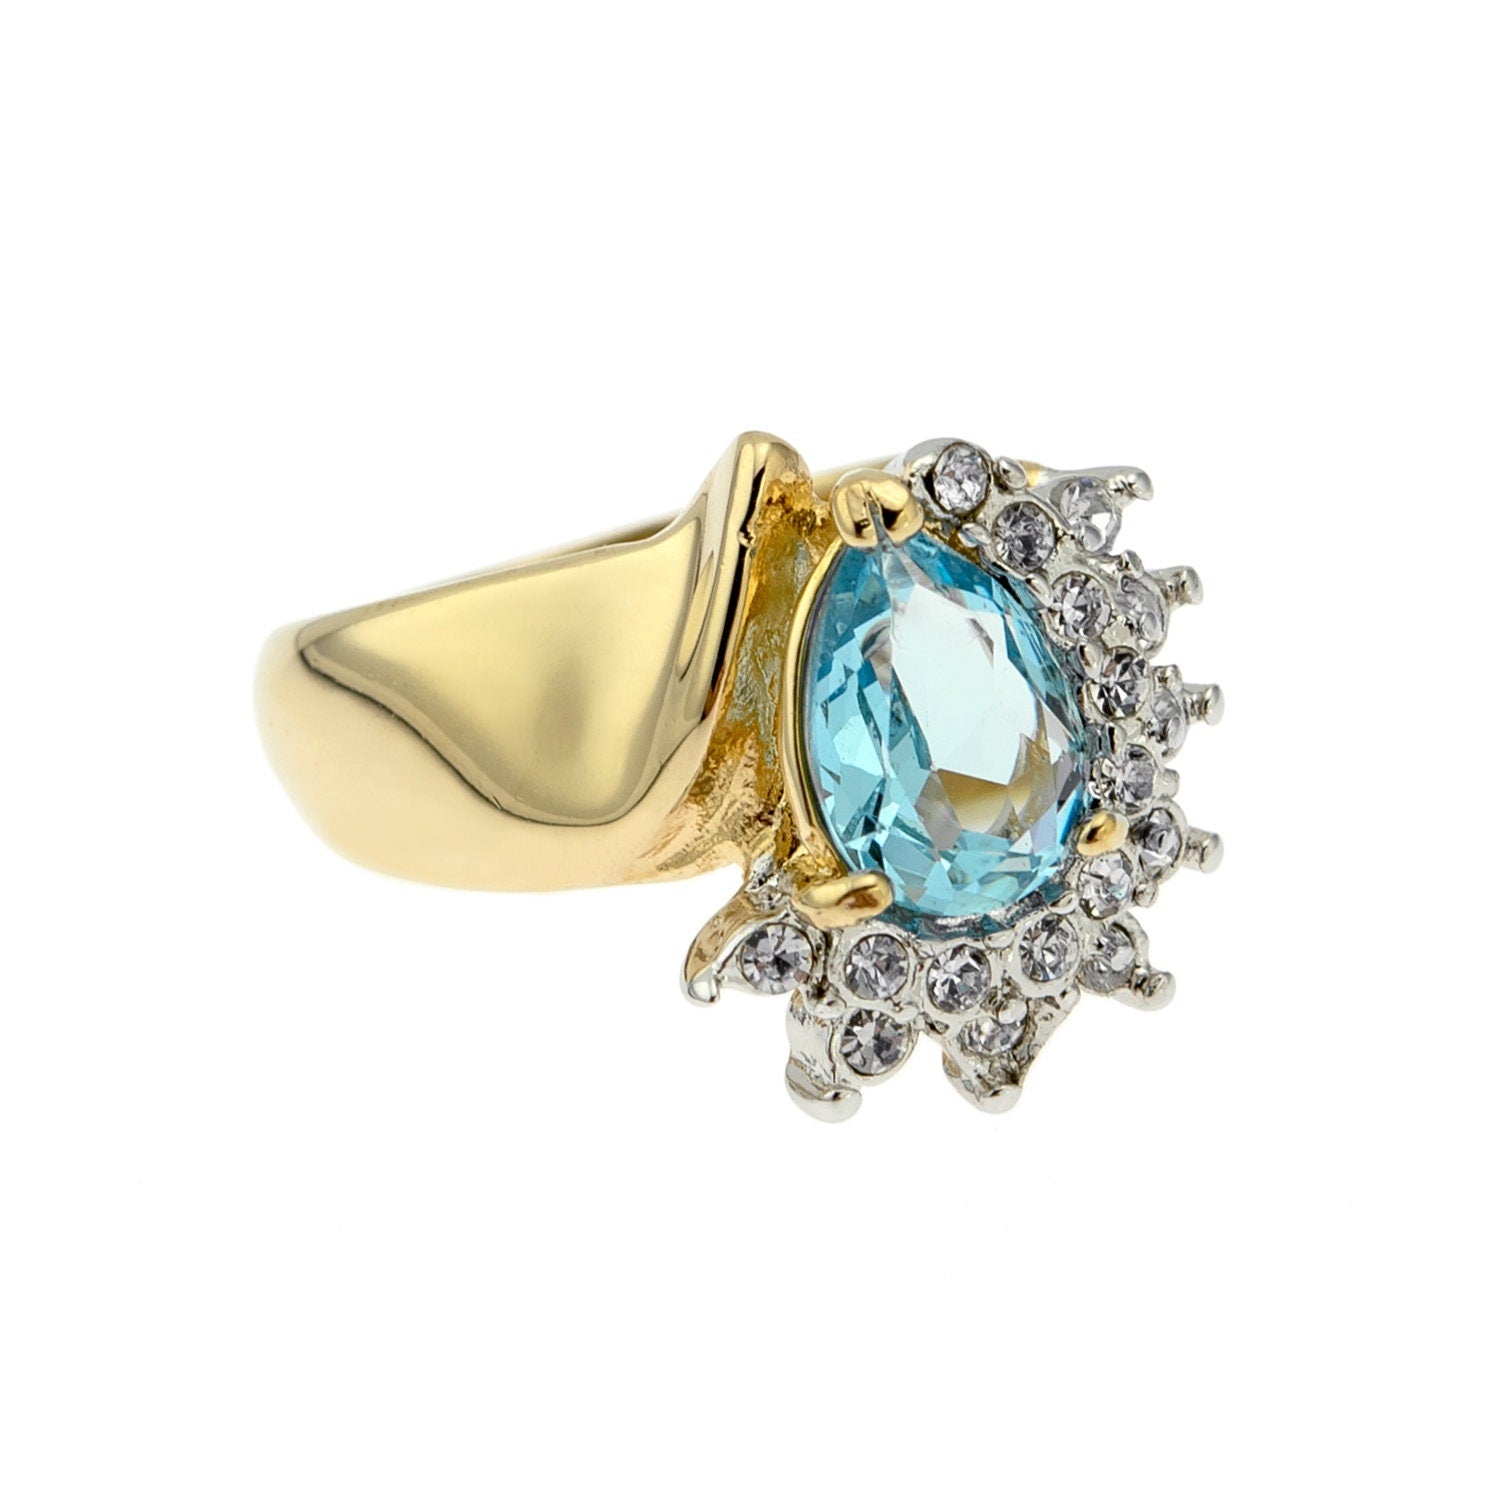 Vintage Ring Aquamarine Cubic Zirconia and Clear Swarovski Crystals 18kt Gold  #R3163-AQY - Limited Stock - Never Worn